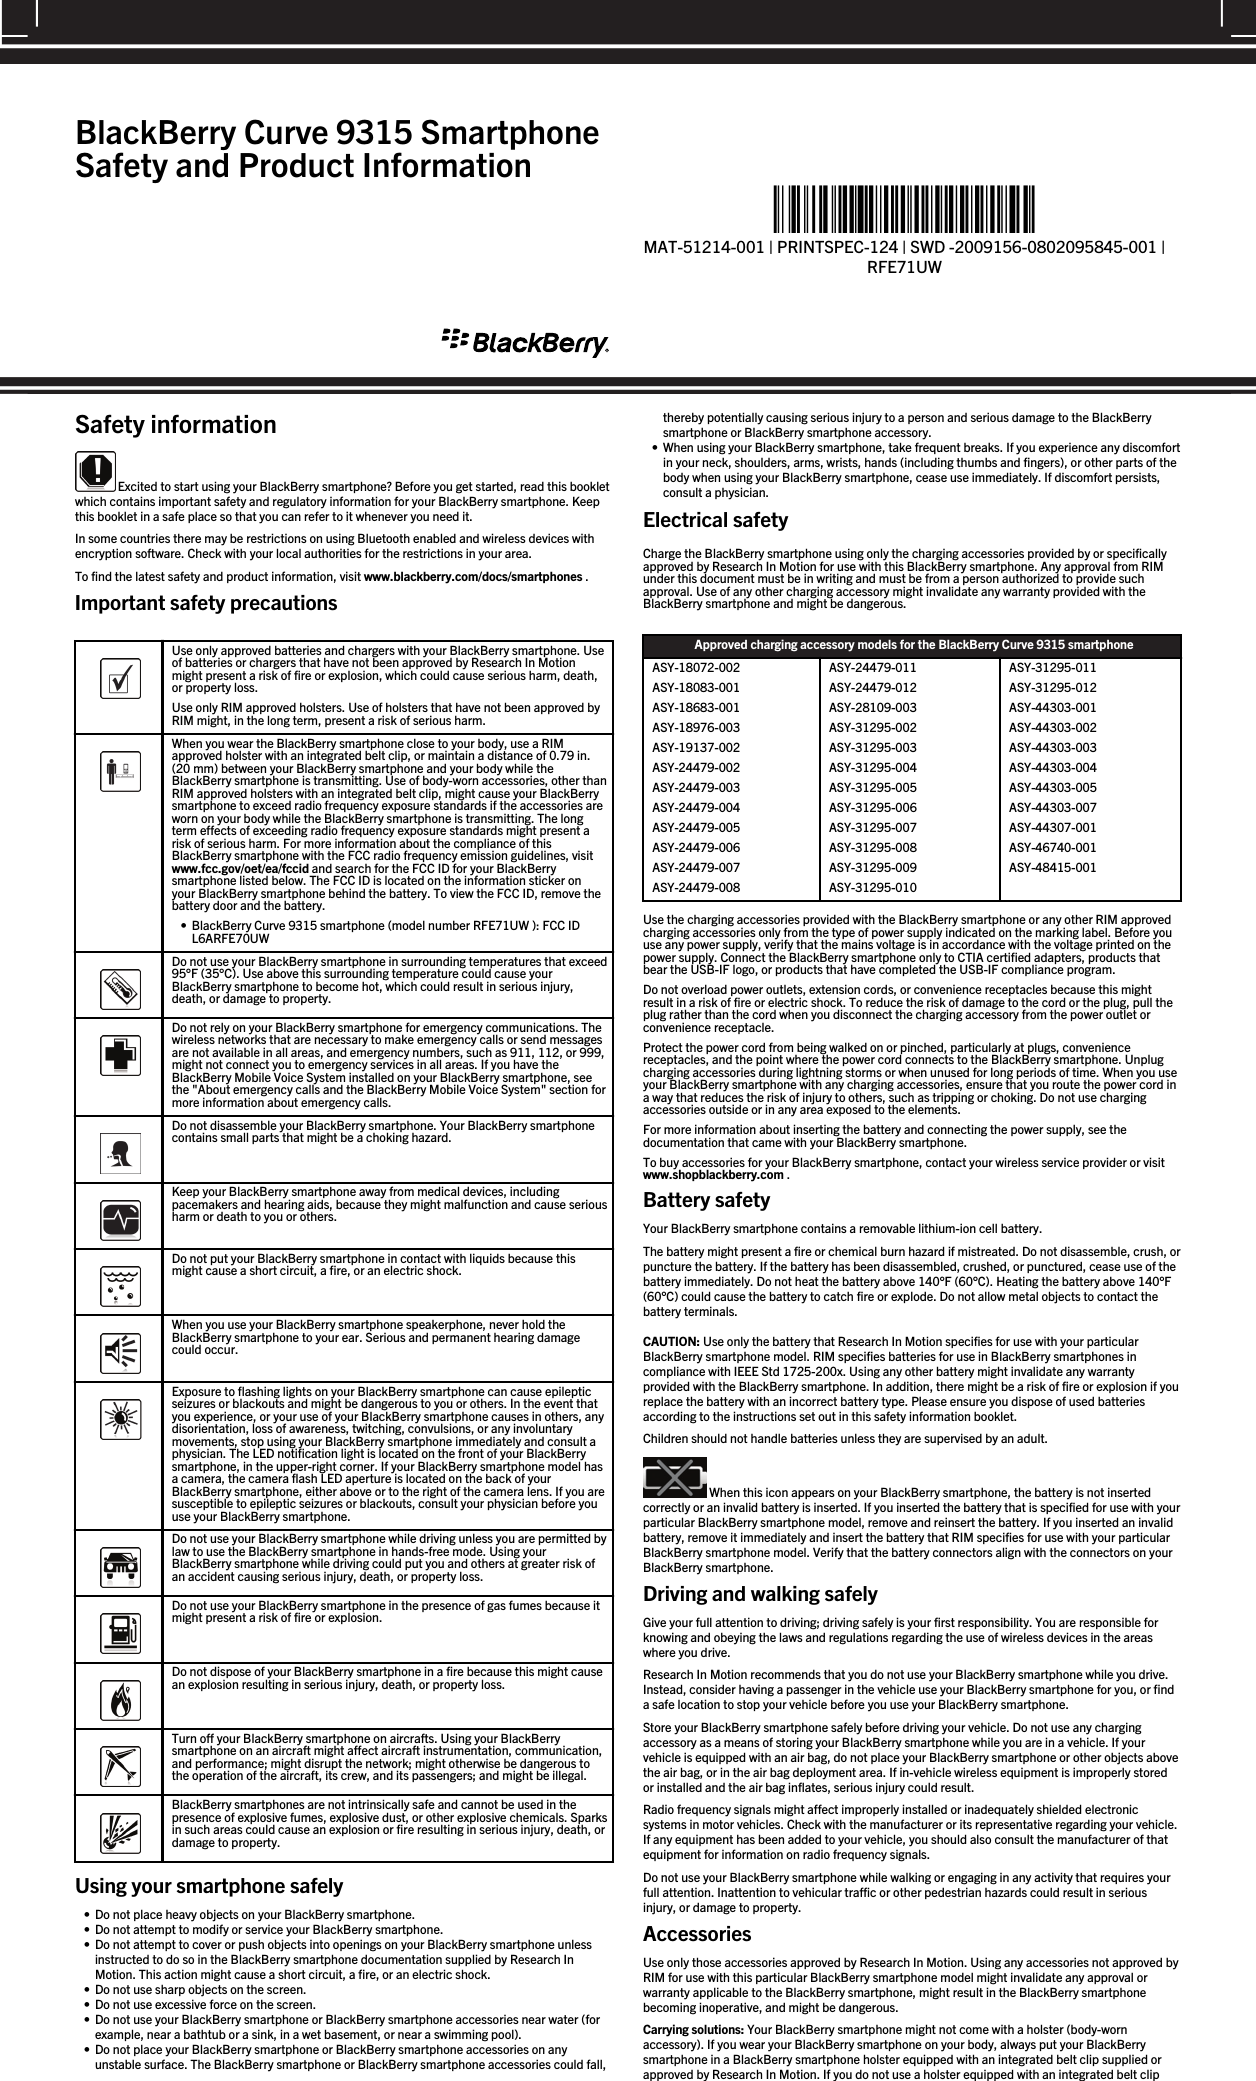 Safety information Excited to start using your BlackBerry smartphone? Before you get started, read this bookletwhich contains important safety and regulatory information for your BlackBerry smartphone. Keepthis booklet in a safe place so that you can refer to it whenever you need it.In some countries there may be restrictions on using Bluetooth enabled and wireless devices withencryption software. Check with your local authorities for the restrictions in your area.To find the latest safety and product information, visit www.blackberry.com/docs/smartphones .Important safety precautions  Use only approved batteries and chargers with your BlackBerry smartphone. Useof batteries or chargers that have not been approved by Research In Motionmight present a risk of fire or explosion, which could cause serious harm, death,or property loss.Use only RIM approved holsters. Use of holsters that have not been approved byRIM might, in the long term, present a risk of serious harm.  When you wear the BlackBerry smartphone close to your body, use a RIMapproved holster with an integrated belt clip, or maintain a distance of 0.79 in.(20 mm) between your BlackBerry smartphone and your body while theBlackBerry smartphone is transmitting. Use of body-worn accessories, other thanRIM approved holsters with an integrated belt clip, might cause your BlackBerrysmartphone to exceed radio frequency exposure standards if the accessories areworn on your body while the BlackBerry smartphone is transmitting. The longterm effects of exceeding radio frequency exposure standards might present arisk of serious harm. For more information about the compliance of thisBlackBerry smartphone with the FCC radio frequency emission guidelines, visitwww.fcc.gov/oet/ea/fccid and search for the FCC ID for your BlackBerrysmartphone listed below. The FCC ID is located on the information sticker onyour BlackBerry smartphone behind the battery. To view the FCC ID, remove thebattery door and the battery.• BlackBerry Curve 9315 smartphone (model number RFE71UW ): FCC IDL6ARFE70UW  Do not use your BlackBerry smartphone in surrounding temperatures that exceed95°F (35°C). Use above this surrounding temperature could cause yourBlackBerry smartphone to become hot, which could result in serious injury,death, or damage to property.  Do not rely on your BlackBerry smartphone for emergency communications. Thewireless networks that are necessary to make emergency calls or send messagesare not available in all areas, and emergency numbers, such as 911, 112, or 999,might not connect you to emergency services in all areas. If you have theBlackBerry Mobile Voice System installed on your BlackBerry smartphone, seethe &quot;About emergency calls and the BlackBerry Mobile Voice System&quot; section formore information about emergency calls.  Do not disassemble your BlackBerry smartphone. Your BlackBerry smartphonecontains small parts that might be a choking hazard.  Keep your BlackBerry smartphone away from medical devices, includingpacemakers and hearing aids, because they might malfunction and cause seriousharm or death to you or others.  Do not put your BlackBerry smartphone in contact with liquids because thismight cause a short circuit, a fire, or an electric shock.  When you use your BlackBerry smartphone speakerphone, never hold theBlackBerry smartphone to your ear. Serious and permanent hearing damagecould occur.  Exposure to flashing lights on your BlackBerry smartphone can cause epilepticseizures or blackouts and might be dangerous to you or others. In the event thatyou experience, or your use of your BlackBerry smartphone causes in others, anydisorientation, loss of awareness, twitching, convulsions, or any involuntarymovements, stop using your BlackBerry smartphone immediately and consult aphysician. The LED notification light is located on the front of your BlackBerrysmartphone, in the upper-right corner. If your BlackBerry smartphone model hasa camera, the camera flash LED aperture is located on the back of yourBlackBerry smartphone, either above or to the right of the camera lens. If you aresusceptible to epileptic seizures or blackouts, consult your physician before youuse your BlackBerry smartphone.  Do not use your BlackBerry smartphone while driving unless you are permitted bylaw to use the BlackBerry smartphone in hands-free mode. Using yourBlackBerry smartphone while driving could put you and others at greater risk ofan accident causing serious injury, death, or property loss.  Do not use your BlackBerry smartphone in the presence of gas fumes because itmight present a risk of fire or explosion.  Do not dispose of your BlackBerry smartphone in a fire because this might causean explosion resulting in serious injury, death, or property loss.  Turn off your BlackBerry smartphone on aircrafts. Using your BlackBerrysmartphone on an aircraft might affect aircraft instrumentation, communication,and performance; might disrupt the network; might otherwise be dangerous tothe operation of the aircraft, its crew, and its passengers; and might be illegal.  BlackBerry smartphones are not intrinsically safe and cannot be used in thepresence of explosive fumes, explosive dust, or other explosive chemicals. Sparksin such areas could cause an explosion or fire resulting in serious injury, death, ordamage to property.Using your smartphone safely• Do not place heavy objects on your BlackBerry smartphone.• Do not attempt to modify or service your BlackBerry smartphone.• Do not attempt to cover or push objects into openings on your BlackBerry smartphone unlessinstructed to do so in the BlackBerry smartphone documentation supplied by Research InMotion. This action might cause a short circuit, a fire, or an electric shock.• Do not use sharp objects on the screen.• Do not use excessive force on the screen.• Do not use your BlackBerry smartphone or BlackBerry smartphone accessories near water (forexample, near a bathtub or a sink, in a wet basement, or near a swimming pool).• Do not place your BlackBerry smartphone or BlackBerry smartphone accessories on anyunstable surface. The BlackBerry smartphone or BlackBerry smartphone accessories could fall,thereby potentially causing serious injury to a person and serious damage to the BlackBerrysmartphone or BlackBerry smartphone accessory.• When using your BlackBerry smartphone, take frequent breaks. If you experience any discomfortin your neck, shoulders, arms, wrists, hands (including thumbs and fingers), or other parts of thebody when using your BlackBerry smartphone, cease use immediately. If discomfort persists,consult a physician.Electrical safetyCharge the BlackBerry smartphone using only the charging accessories provided by or specificallyapproved by Research In Motion for use with this BlackBerry smartphone. Any approval from RIMunder this document must be in writing and must be from a person authorized to provide suchapproval. Use of any other charging accessory might invalidate any warranty provided with theBlackBerry smartphone and might be dangerous.Approved charging accessory models for the BlackBerry Curve 9315 smartphoneASY-18072-002ASY-18083-001ASY-18683-001ASY-18976-003ASY-19137-002ASY-24479-002ASY-24479-003ASY-24479-004ASY-24479-005ASY-24479-006ASY-24479-007ASY-24479-008ASY-24479-011ASY-24479-012ASY-28109-003ASY-31295-002ASY-31295-003ASY-31295-004ASY-31295-005ASY-31295-006ASY-31295-007ASY-31295-008ASY-31295-009ASY-31295-010ASY-31295-011ASY-31295-012ASY-44303-001ASY-44303-002ASY-44303-003ASY-44303-004ASY-44303-005ASY-44303-007ASY-44307-001ASY-46740-001ASY-48415-001Use the charging accessories provided with the BlackBerry smartphone or any other RIM approvedcharging accessories only from the type of power supply indicated on the marking label. Before youuse any power supply, verify that the mains voltage is in accordance with the voltage printed on thepower supply. Connect the BlackBerry smartphone only to CTIA certified adapters, products thatbear the USB-IF logo, or products that have completed the USB-IF compliance program.Do not overload power outlets, extension cords, or convenience receptacles because this mightresult in a risk of fire or electric shock. To reduce the risk of damage to the cord or the plug, pull theplug rather than the cord when you disconnect the charging accessory from the power outlet orconvenience receptacle.Protect the power cord from being walked on or pinched, particularly at plugs, conveniencereceptacles, and the point where the power cord connects to the BlackBerry smartphone. Unplugcharging accessories during lightning storms or when unused for long periods of time. When you useyour BlackBerry smartphone with any charging accessories, ensure that you route the power cord ina way that reduces the risk of injury to others, such as tripping or choking. Do not use chargingaccessories outside or in any area exposed to the elements.For more information about inserting the battery and connecting the power supply, see thedocumentation that came with your BlackBerry smartphone.To buy accessories for your BlackBerry smartphone, contact your wireless service provider or visitwww.shopblackberry.com .Battery safetyYour BlackBerry smartphone contains a removable lithium-ion cell battery.The battery might present a fire or chemical burn hazard if mistreated. Do not disassemble, crush, orpuncture the battery. If the battery has been disassembled, crushed, or punctured, cease use of thebattery immediately. Do not heat the battery above 140°F (60°C). Heating the battery above 140°F(60°C) could cause the battery to catch fire or explode. Do not allow metal objects to contact thebattery terminals.CAUTION: Use only the battery that Research In Motion specifies for use with your particularBlackBerry smartphone model. RIM specifies batteries for use in BlackBerry smartphones incompliance with IEEE Std 1725-200x. Using any other battery might invalidate any warrantyprovided with the BlackBerry smartphone. In addition, there might be a risk of fire or explosion if youreplace the battery with an incorrect battery type. Please ensure you dispose of used batteriesaccording to the instructions set out in this safety information booklet.Children should not handle batteries unless they are supervised by an adult. When this icon appears on your BlackBerry smartphone, the battery is not insertedcorrectly or an invalid battery is inserted. If you inserted the battery that is specified for use with yourparticular BlackBerry smartphone model, remove and reinsert the battery. If you inserted an invalidbattery, remove it immediately and insert the battery that RIM specifies for use with your particularBlackBerry smartphone model. Verify that the battery connectors align with the connectors on yourBlackBerry smartphone.Driving and walking safelyGive your full attention to driving; driving safely is your first responsibility. You are responsible forknowing and obeying the laws and regulations regarding the use of wireless devices in the areaswhere you drive.Research In Motion recommends that you do not use your BlackBerry smartphone while you drive.Instead, consider having a passenger in the vehicle use your BlackBerry smartphone for you, or finda safe location to stop your vehicle before you use your BlackBerry smartphone.Store your BlackBerry smartphone safely before driving your vehicle. Do not use any chargingaccessory as a means of storing your BlackBerry smartphone while you are in a vehicle. If yourvehicle is equipped with an air bag, do not place your BlackBerry smartphone or other objects abovethe air bag, or in the air bag deployment area. If in-vehicle wireless equipment is improperly storedor installed and the air bag inflates, serious injury could result.Radio frequency signals might affect improperly installed or inadequately shielded electronicsystems in motor vehicles. Check with the manufacturer or its representative regarding your vehicle.If any equipment has been added to your vehicle, you should also consult the manufacturer of thatequipment for information on radio frequency signals.Do not use your BlackBerry smartphone while walking or engaging in any activity that requires yourfull attention. Inattention to vehicular traffic or other pedestrian hazards could result in seriousinjury, or damage to property.AccessoriesUse only those accessories approved by Research In Motion. Using any accessories not approved byRIM for use with this particular BlackBerry smartphone model might invalidate any approval orwarranty applicable to the BlackBerry smartphone, might result in the BlackBerry smartphonebecoming inoperative, and might be dangerous.Carrying solutions: Your BlackBerry smartphone might not come with a holster (body-wornaccessory). If you wear your BlackBerry smartphone on your body, always put your BlackBerrysmartphone in a BlackBerry smartphone holster equipped with an integrated belt clip supplied orapproved by Research In Motion. If you do not use a holster equipped with an integrated belt clipBlackBerry Curve 9315 SmartphoneSafety and Product Information%&quot;$!)&apos;!#&apos;%+!&quot;%*)!-%*&quot;&quot;*%&amp;*!&quot;*%&amp;&quot;)&quot;%*&quot;)&amp;&quot;)&amp;&quot;*%&quot;&quot;-&apos;)!1MAT-51214-001 | PRINTSPEC-124 | SWD -2009156-0802095845-001 |RFE71UW